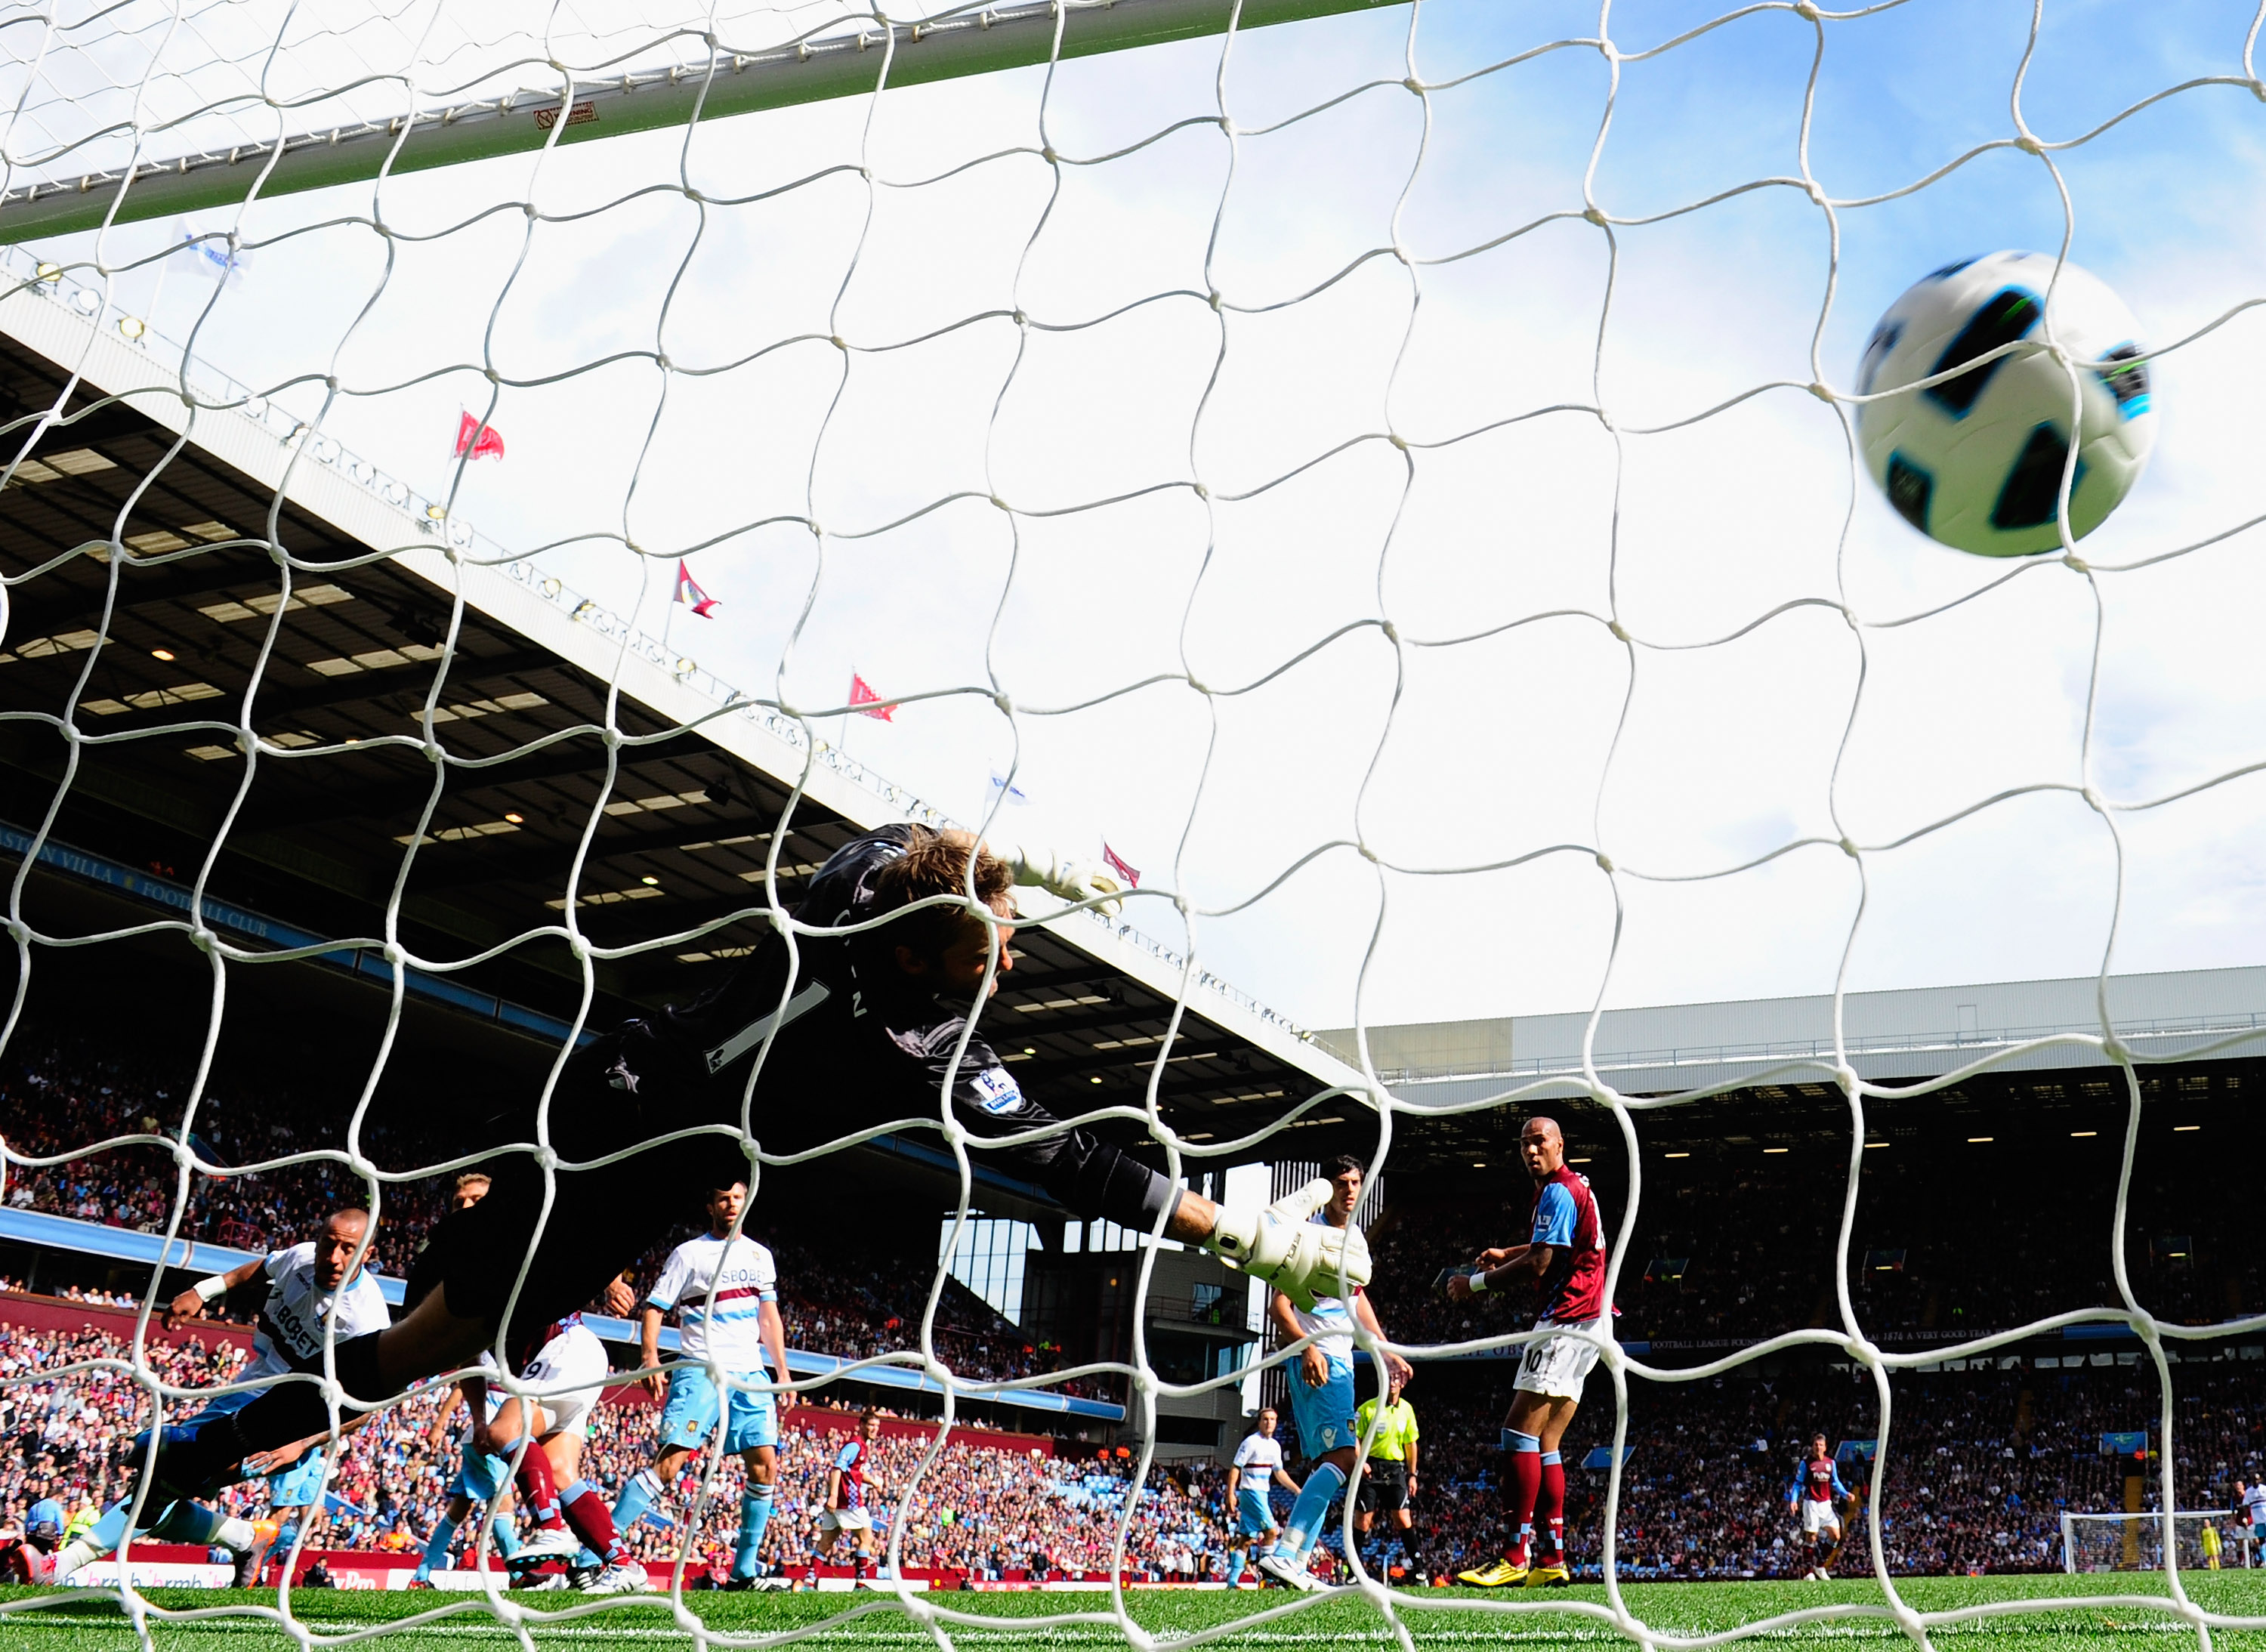 BIRMINGHAM, ENGLAND - AUGUST 14:  Robert Green of West Ham United fails to save the header of Stiliyan Petrov of Aston Villa during the Barclays Premier League match between Aston Villa and West Ham United at Villa Park on August 14, 2010 in Birmingham, E